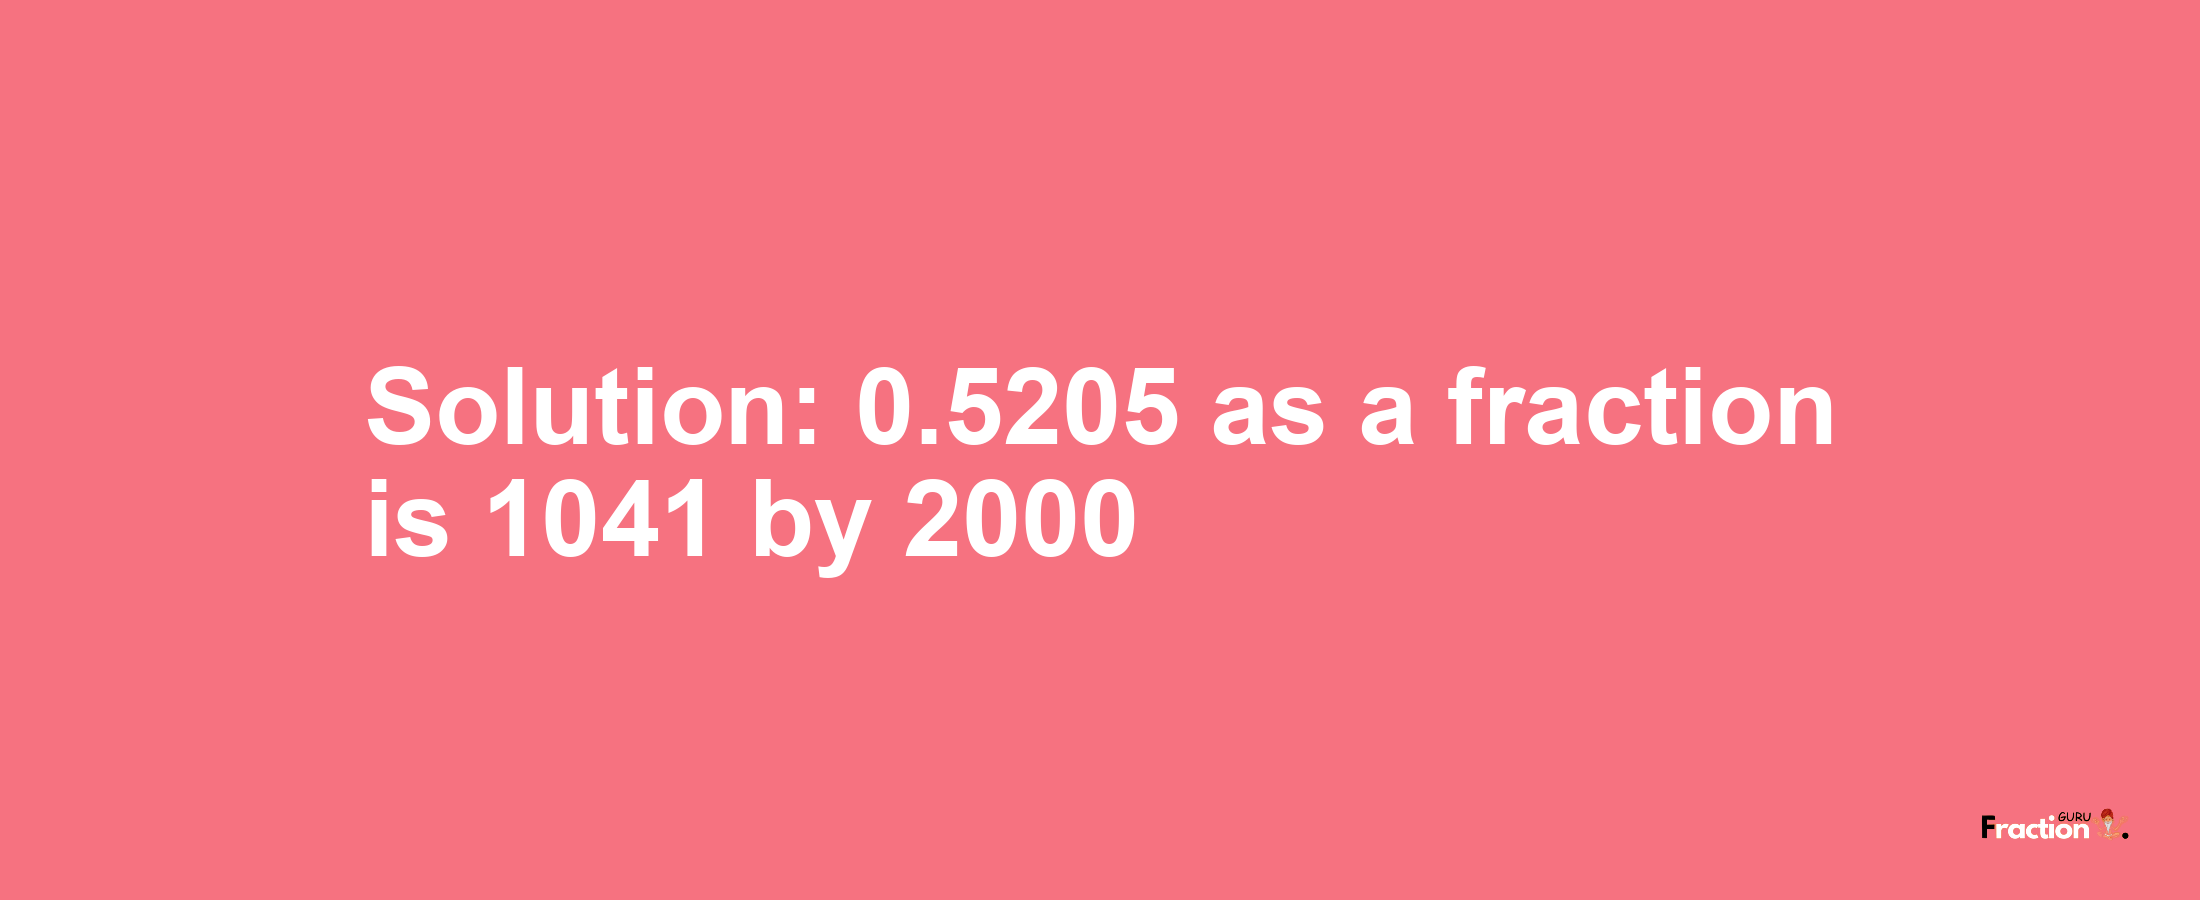 Solution:0.5205 as a fraction is 1041/2000